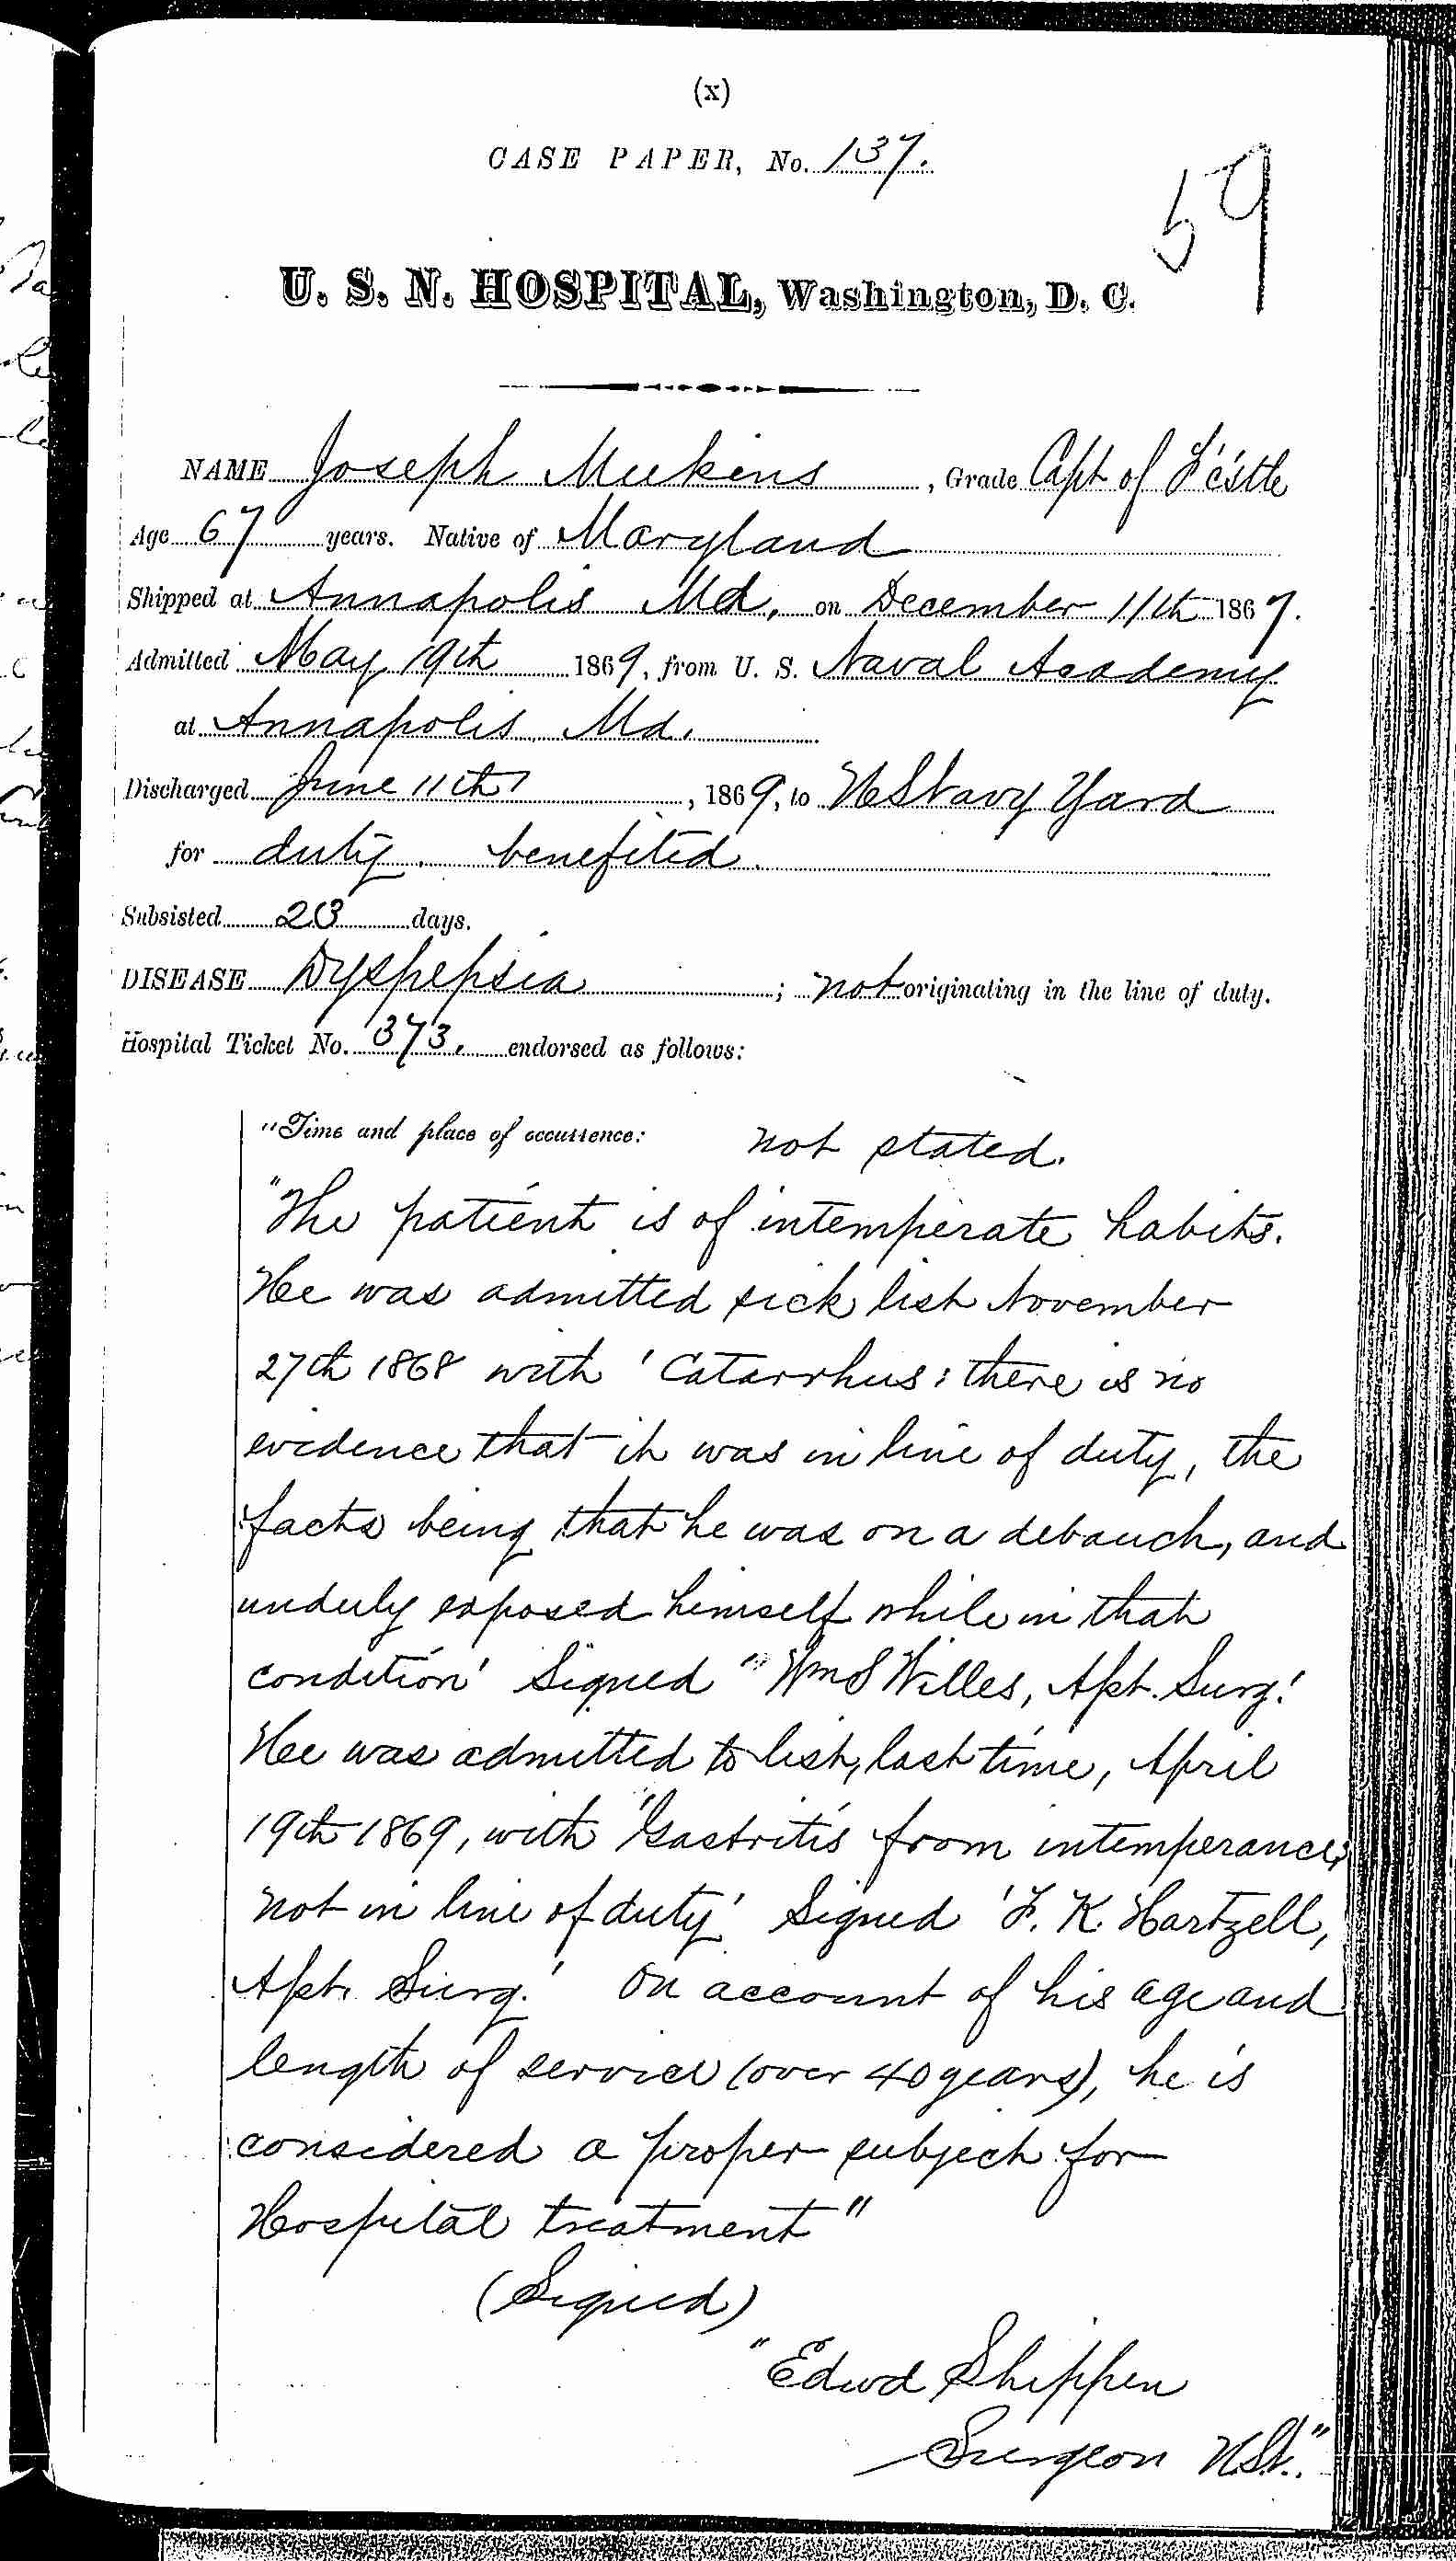 Entry for Joseph Meekins (page 1 of 3) in the log Hospital Tickets and Case Papers - Naval Hospital - Washington, D.C. - 1868-69